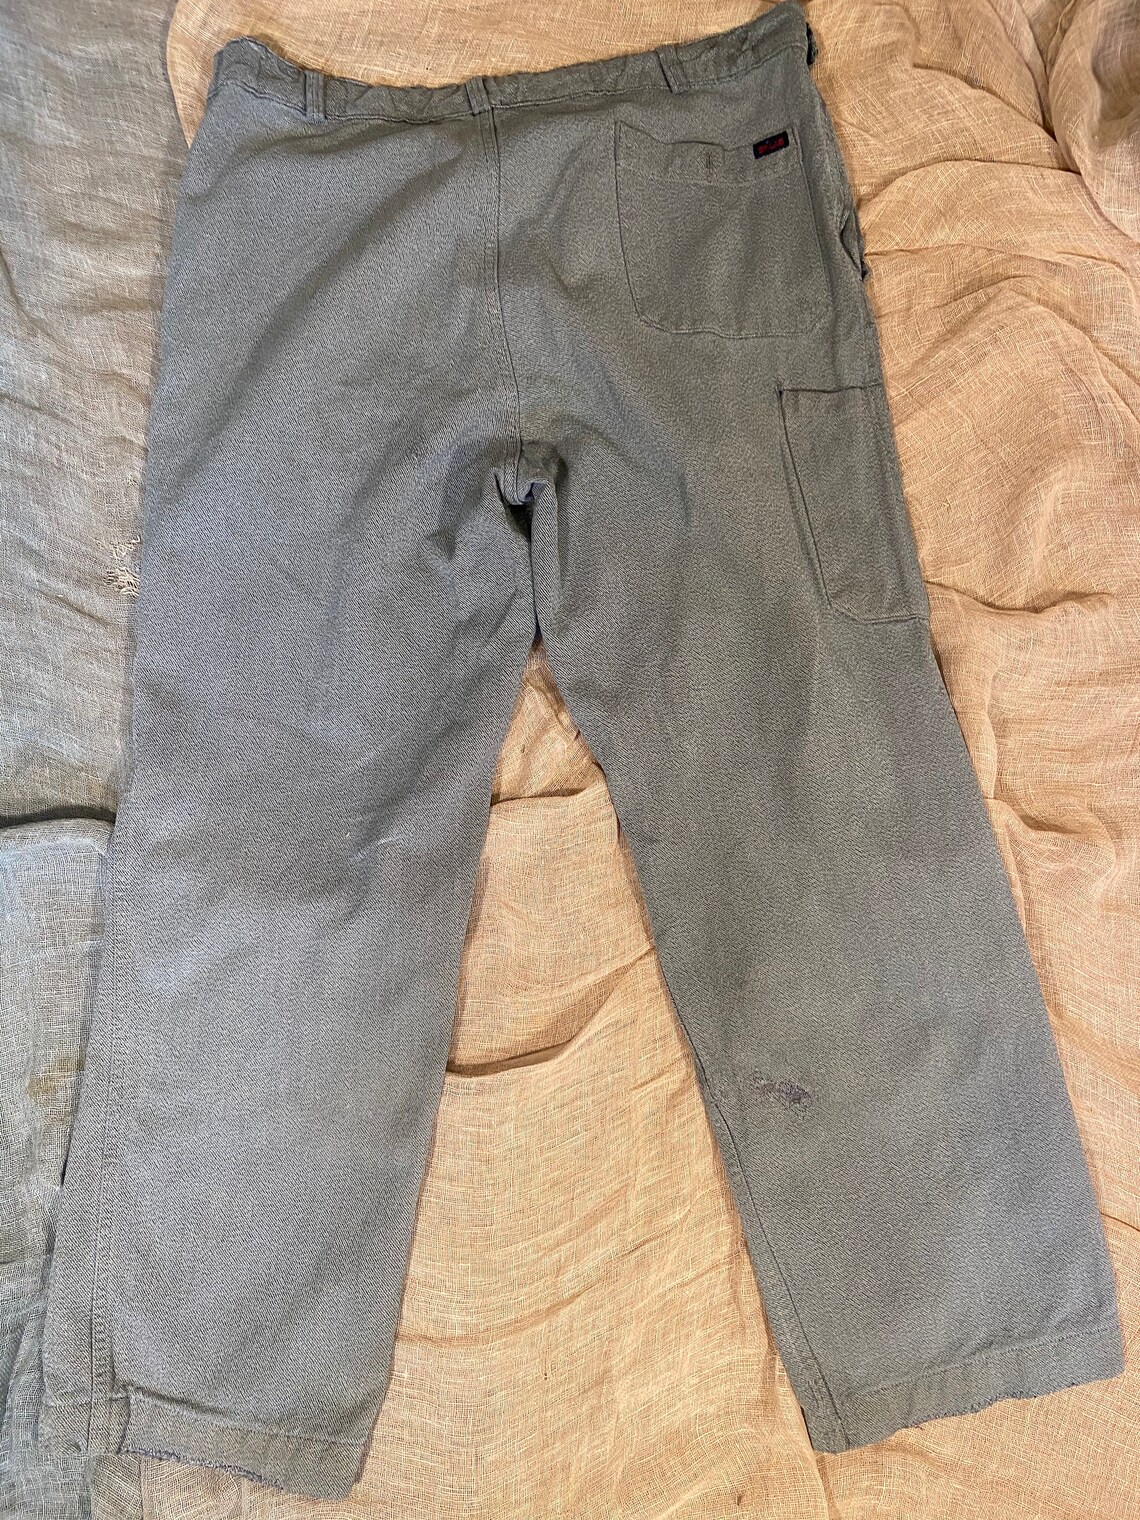 Vintage Washed Out Green Workwear Trousers | Etsy